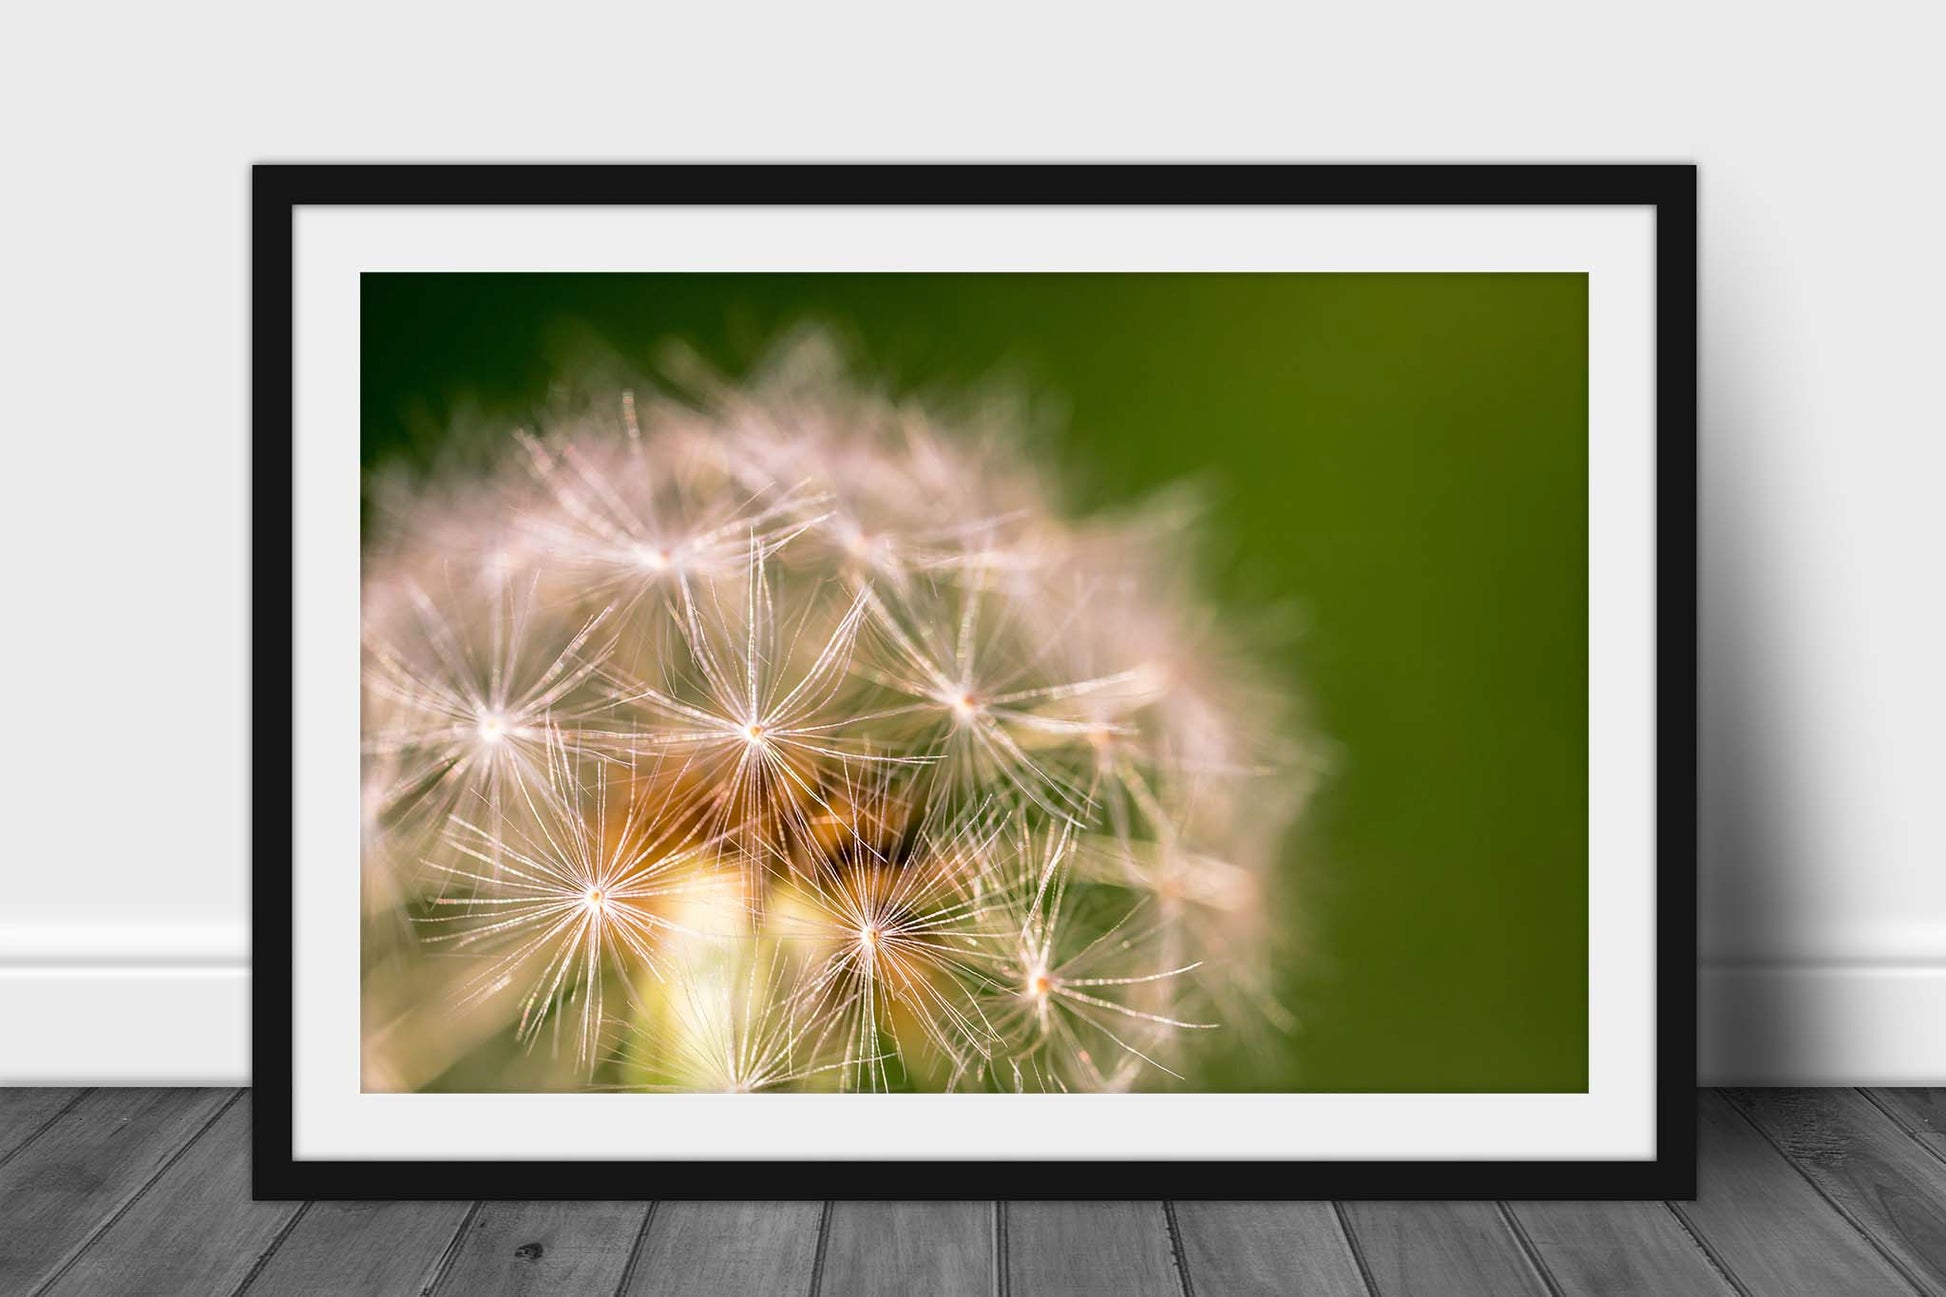 Framed botanical print of a close up of a dandelion head against a green backdrop on a spring day in Oklahoma by Sean Ramsey of Southern Plains Photography.